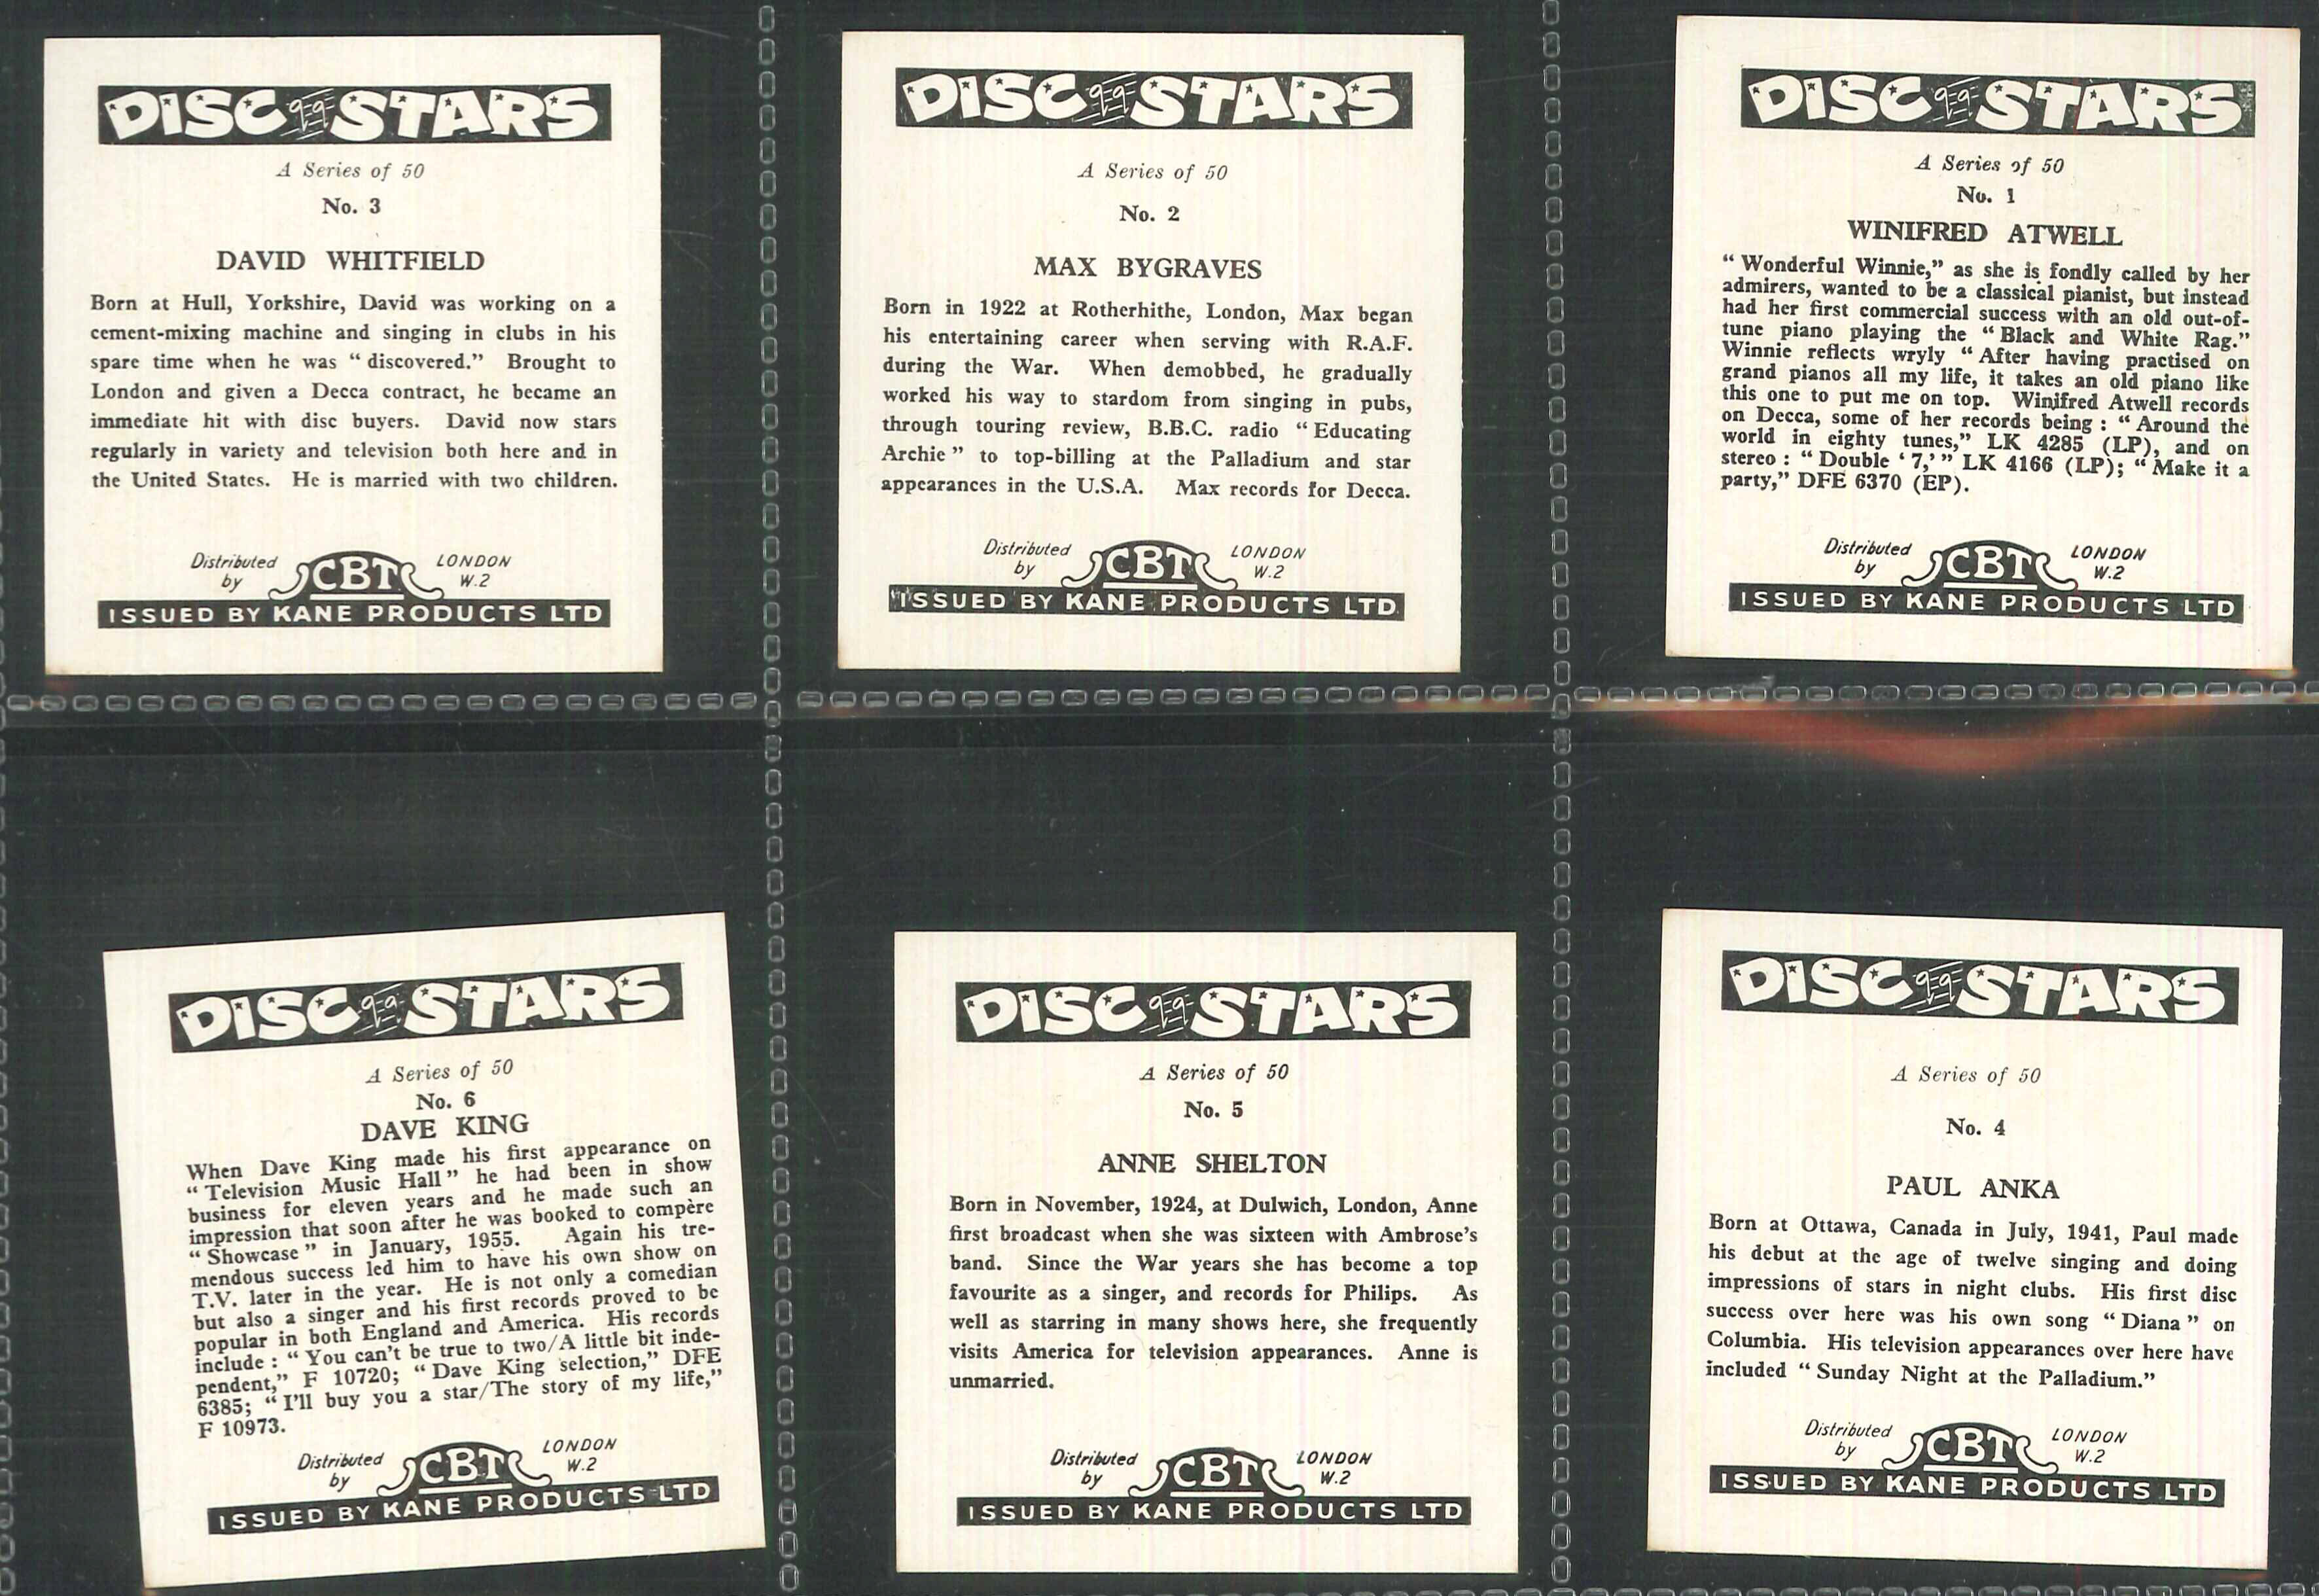 Kane Products - Disc Stars set of L 50